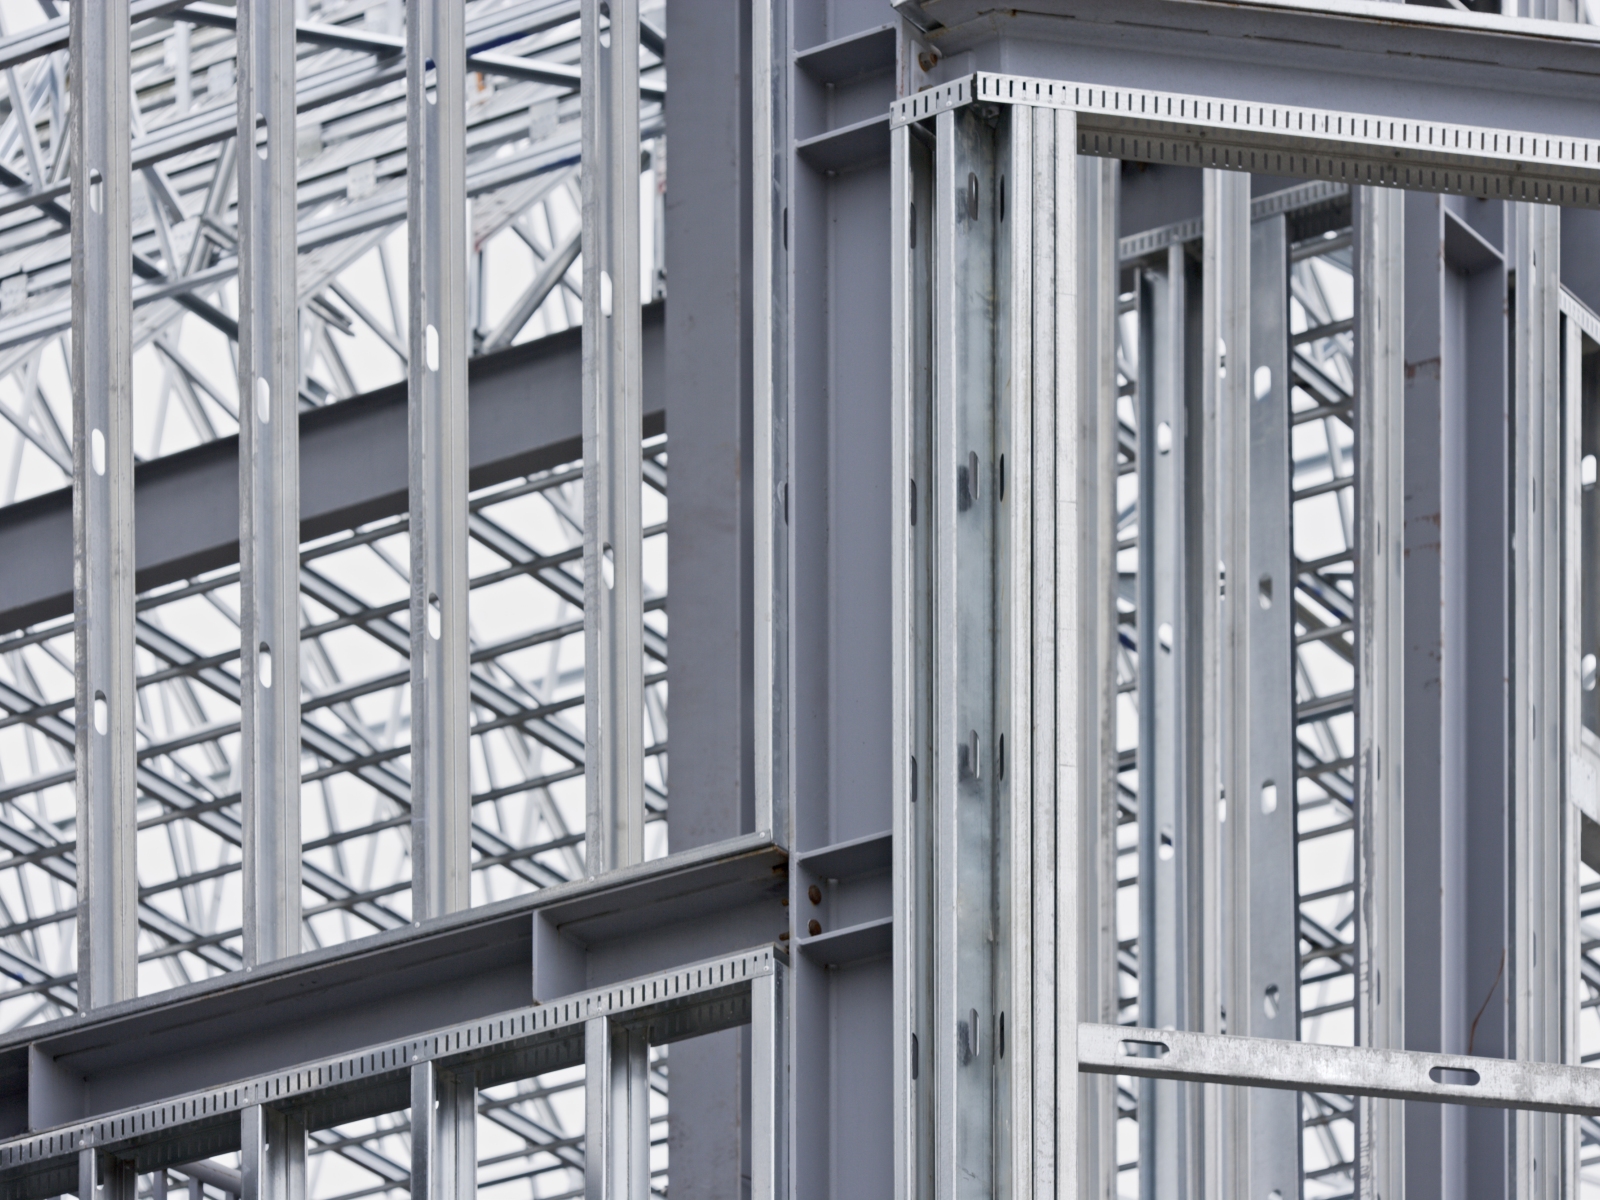     SFS (Steel Framing Systems)